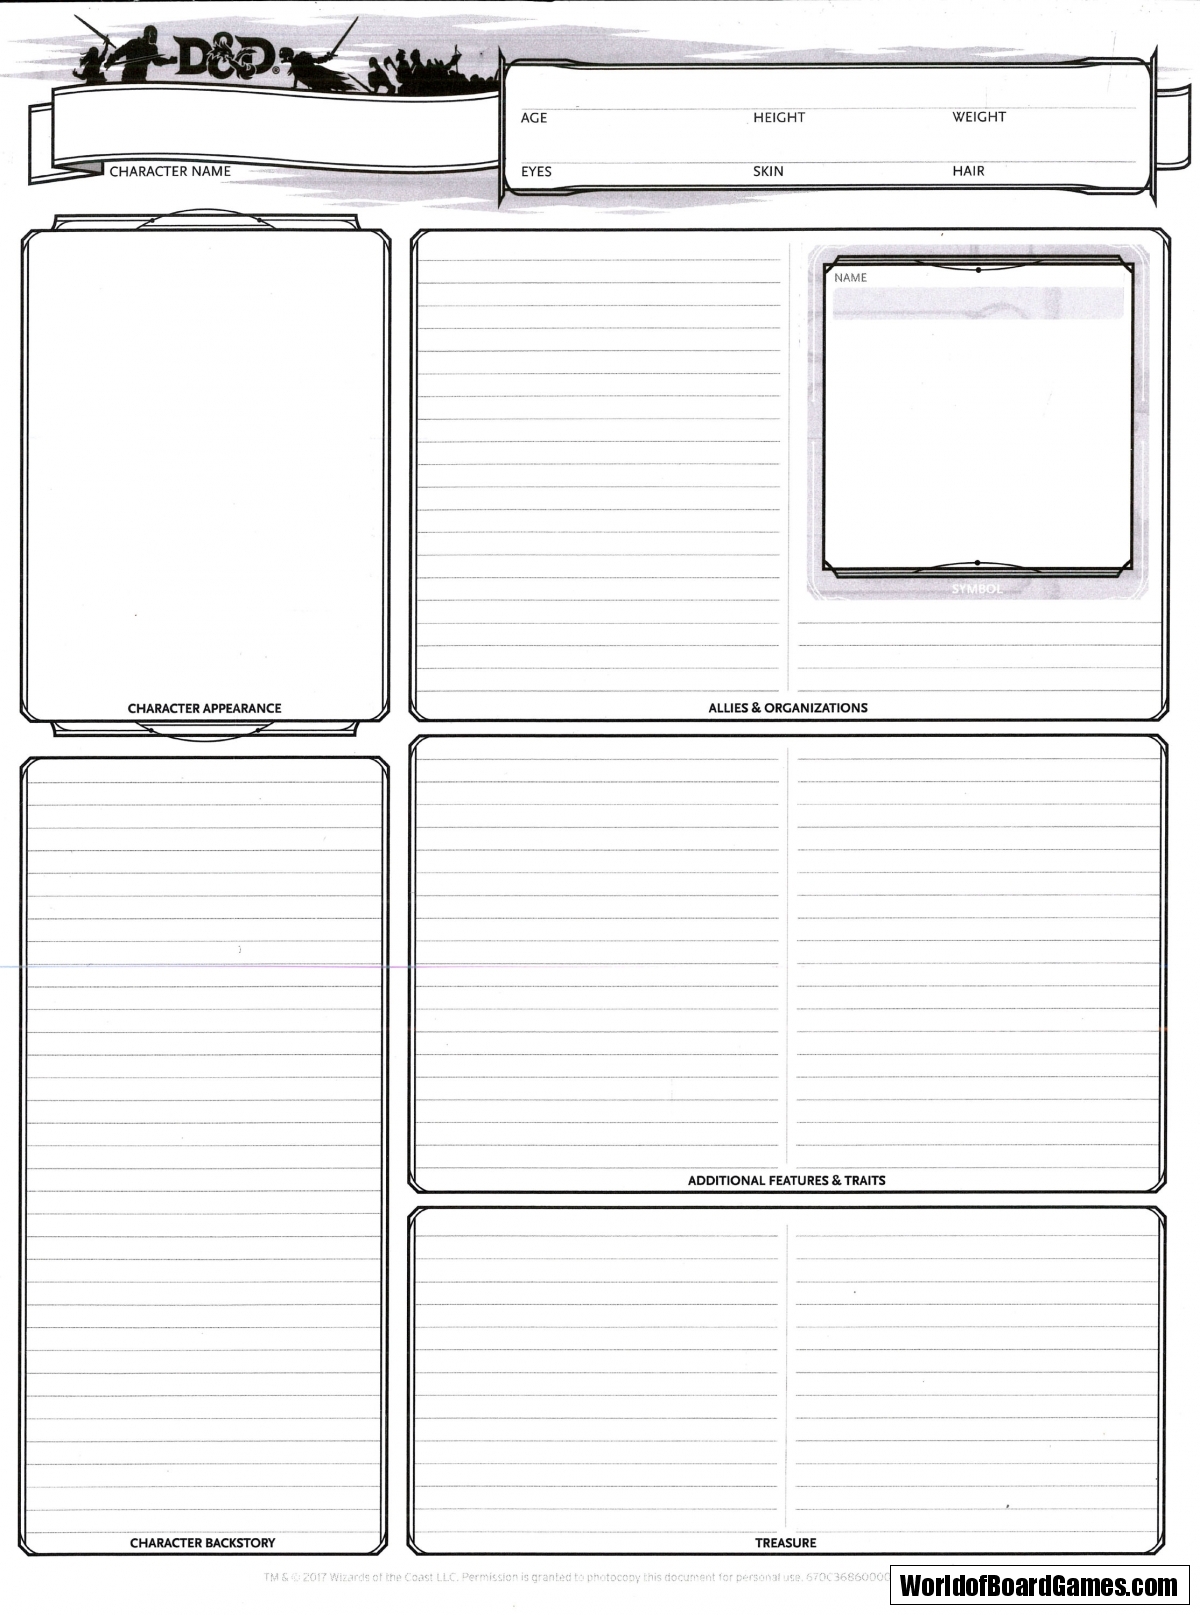 dungeons-dragons-5th-character-sheets-worldofboardgames